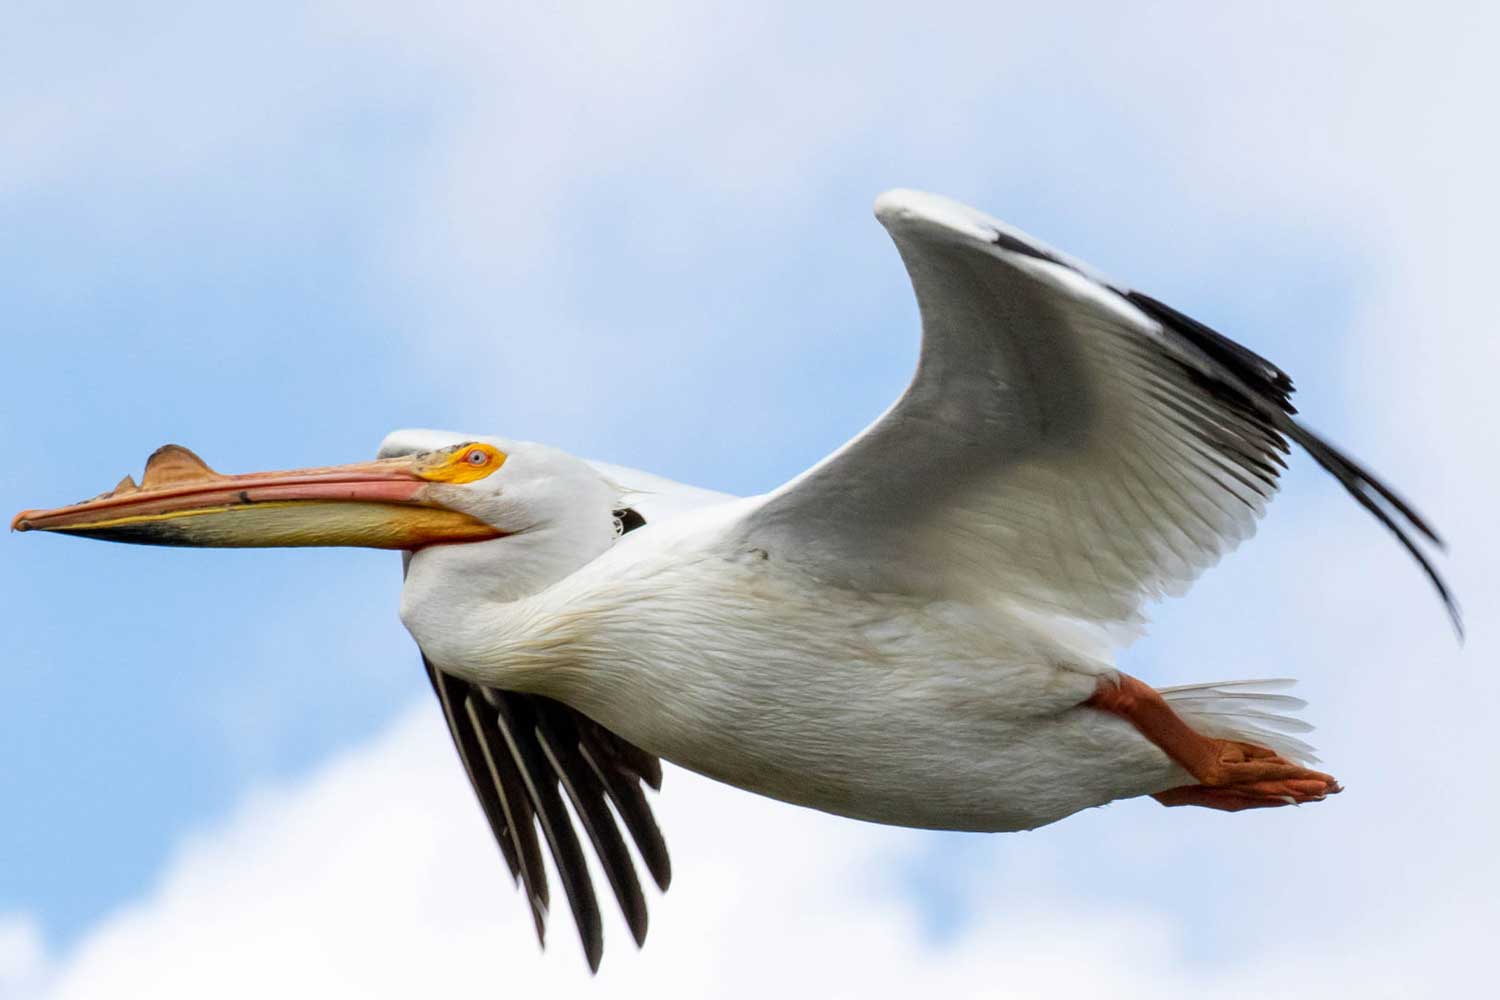 A pelican in flight with its wings extended in front of blue sky strewn with clouds.